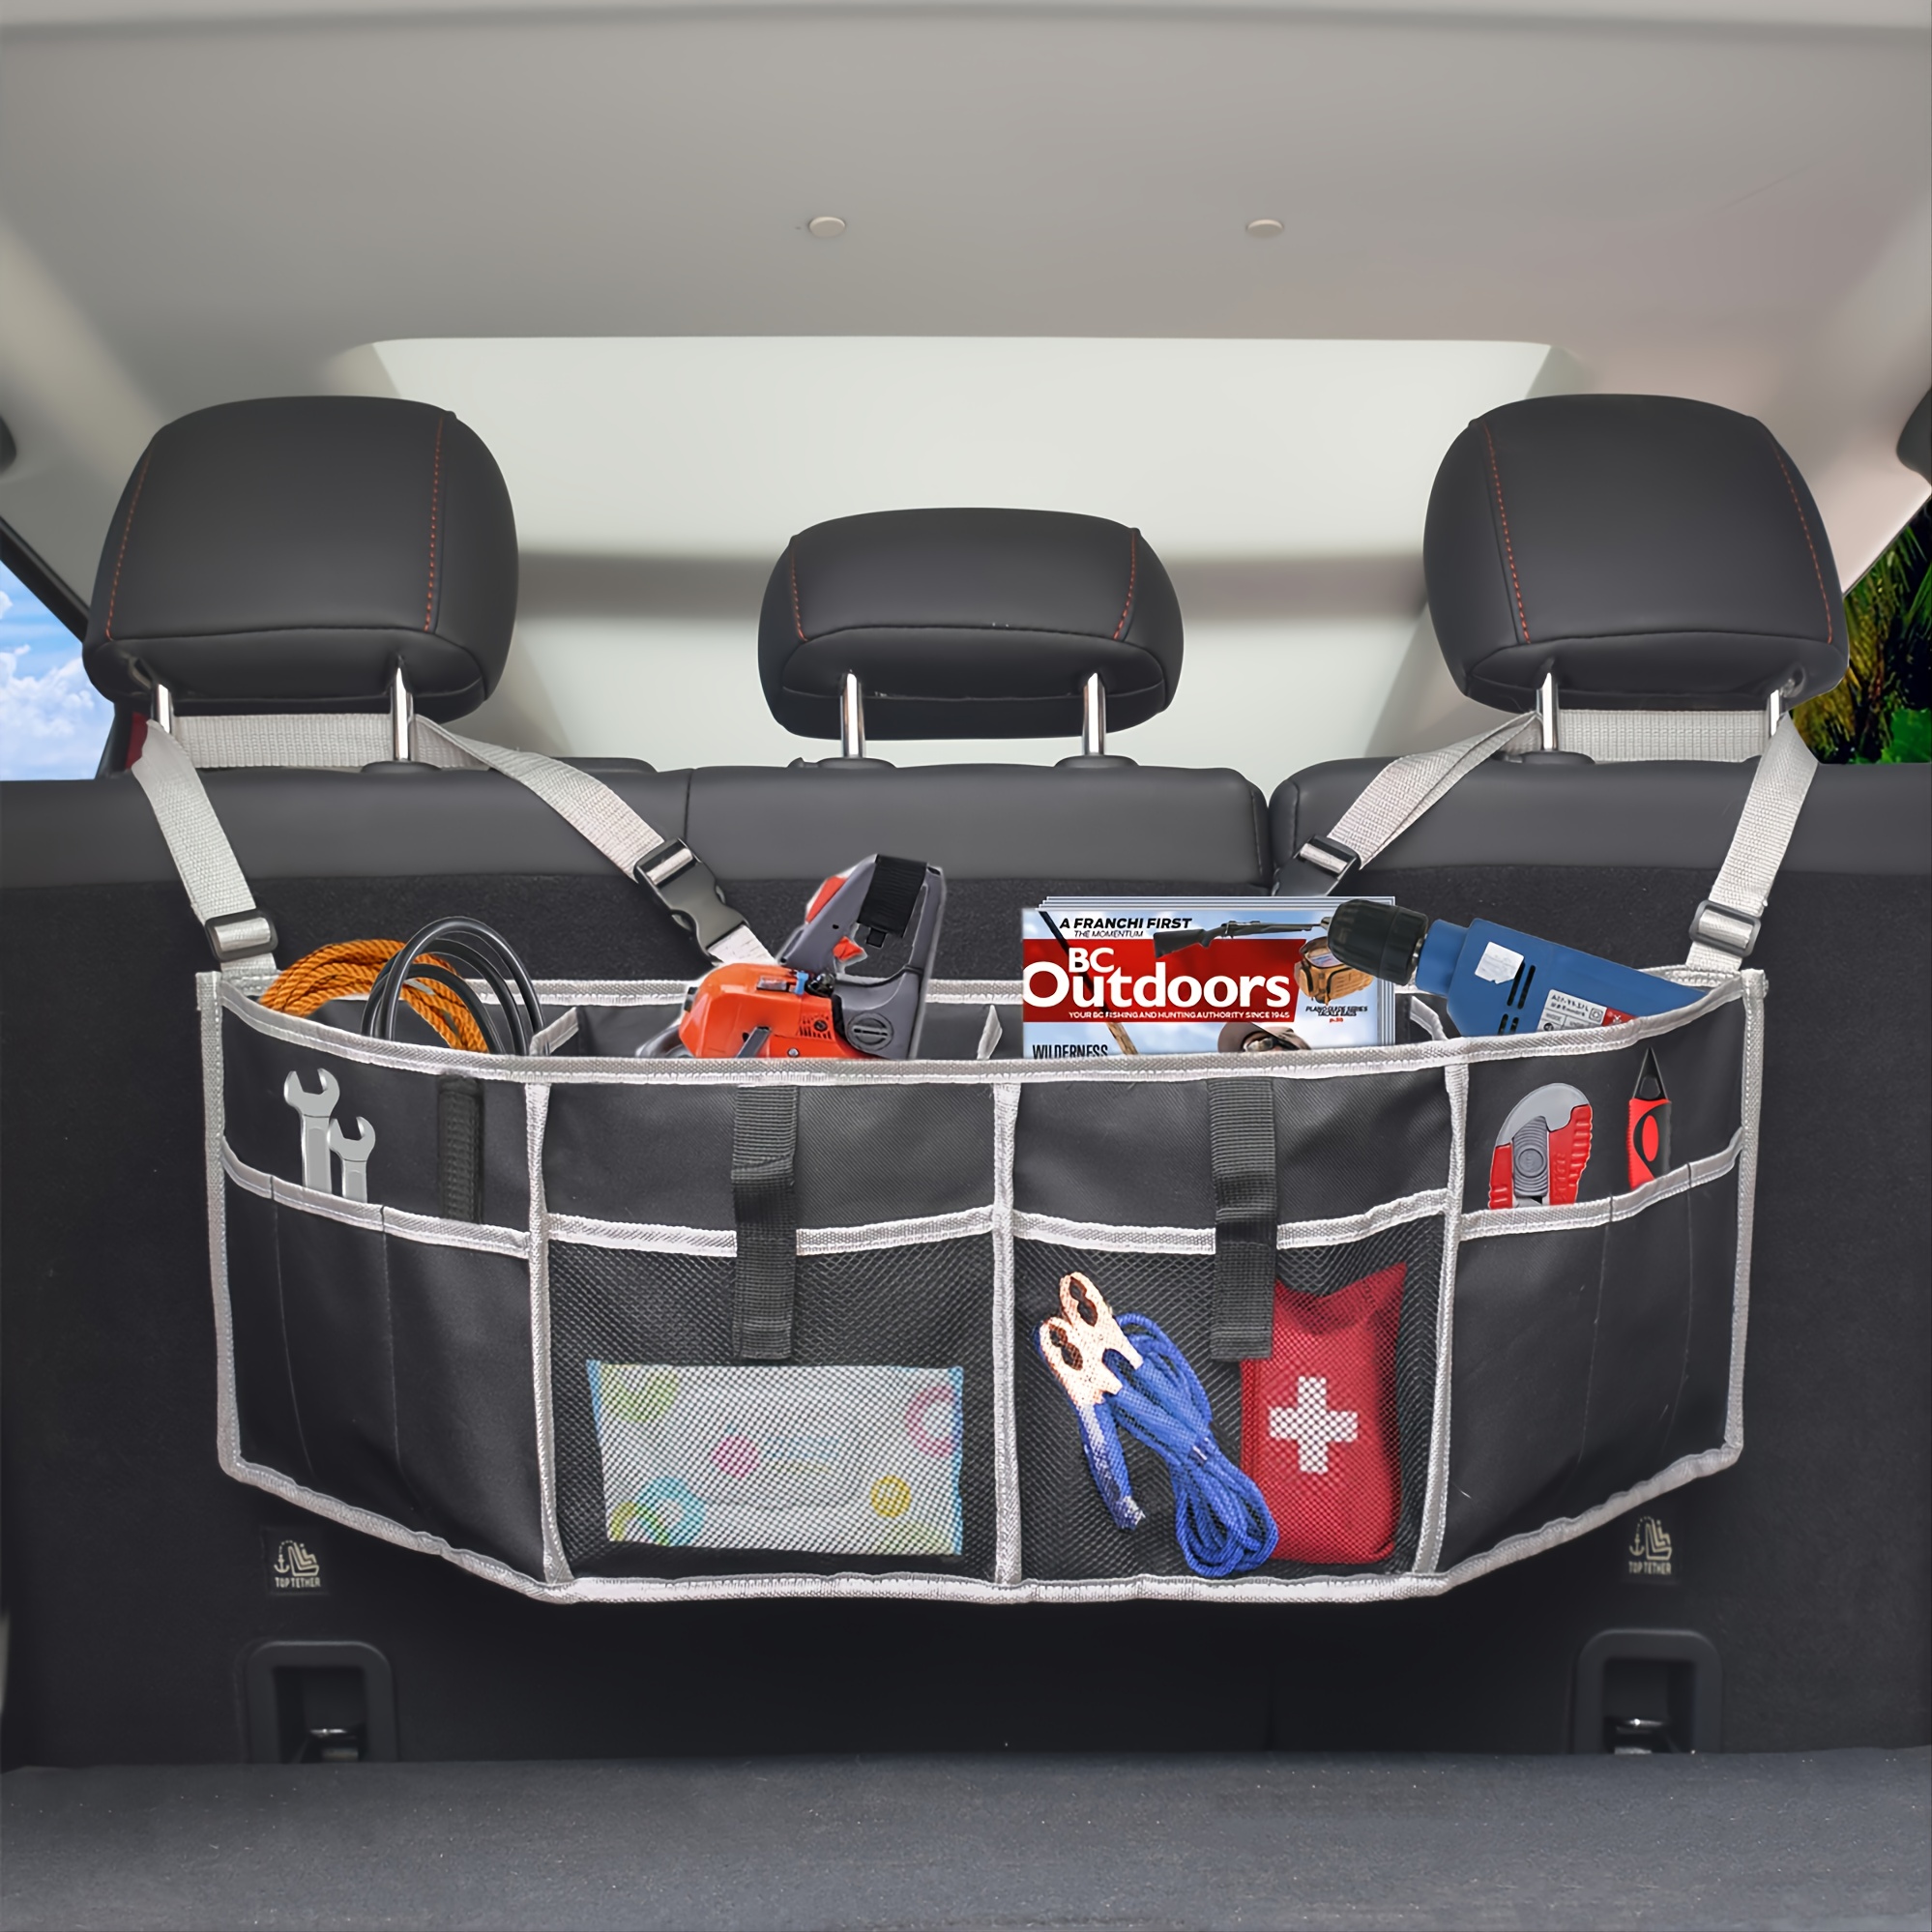 Backseat Trunk Organizer for SUV, Car Hanging Organizer, Foldable Cargo Storage Bag with 12 Pockets, Adjustable Strap for Most Vehicles